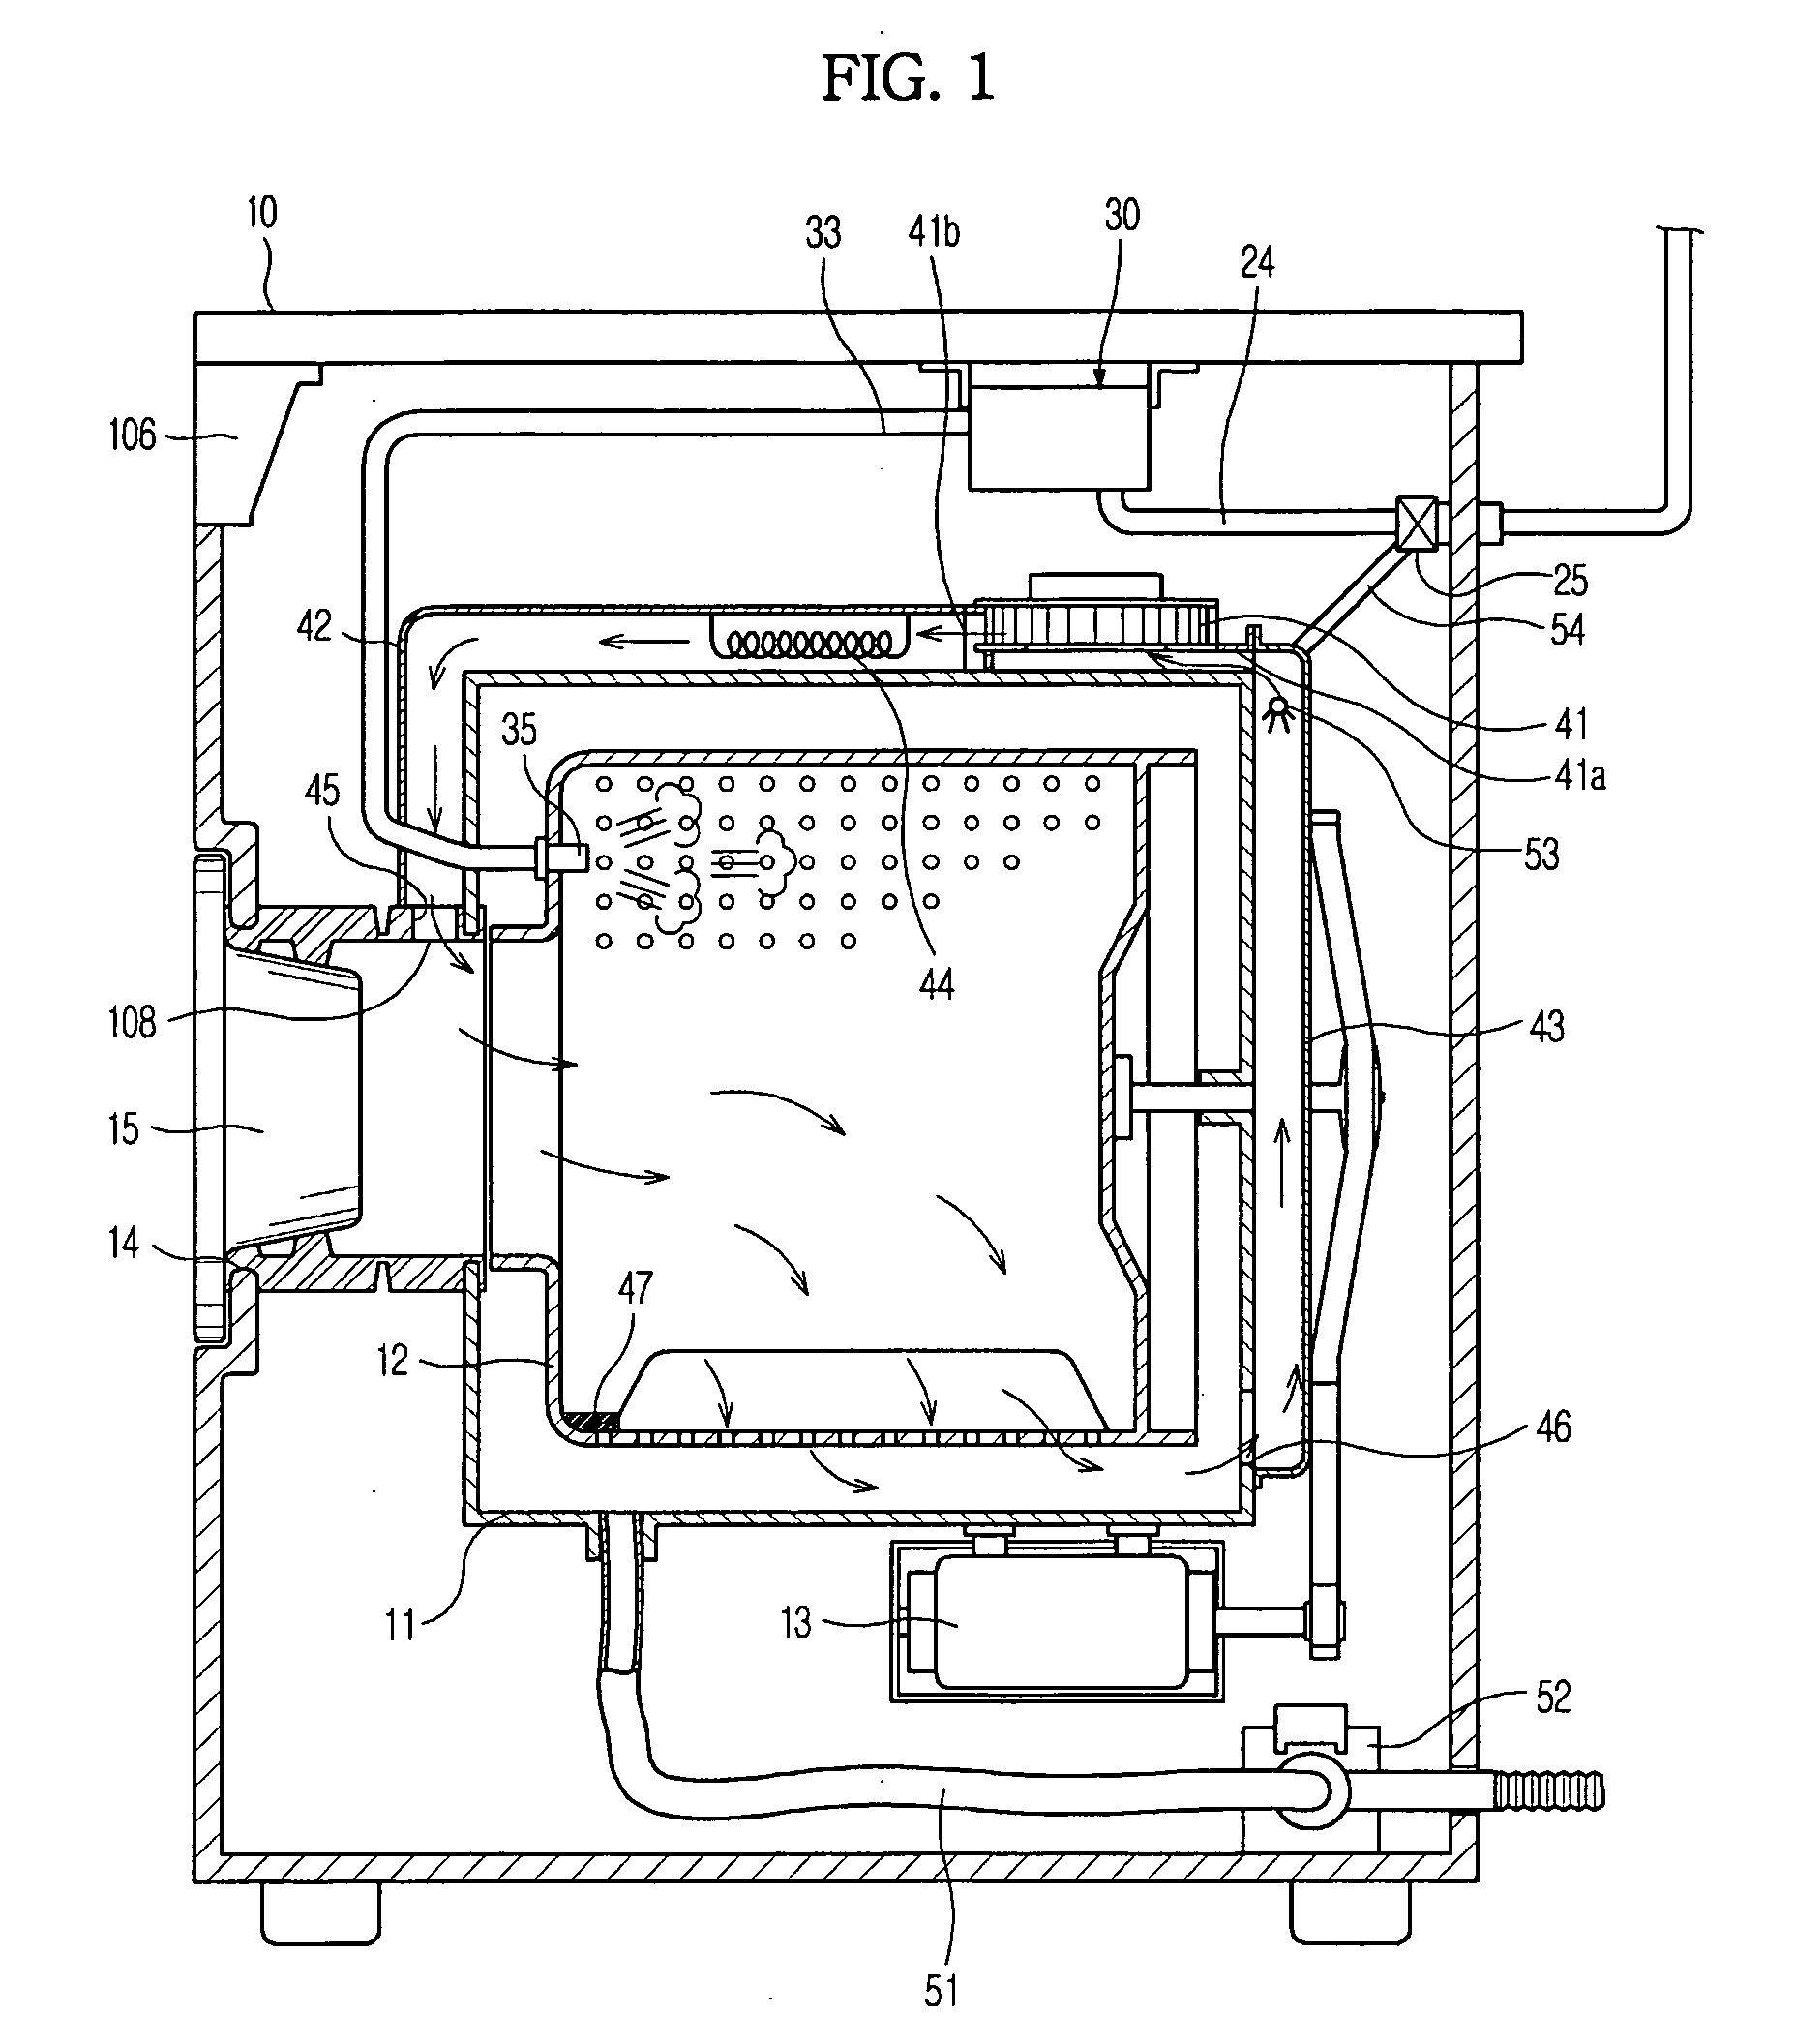 Dryer and method of controlling cleaning operation thereof